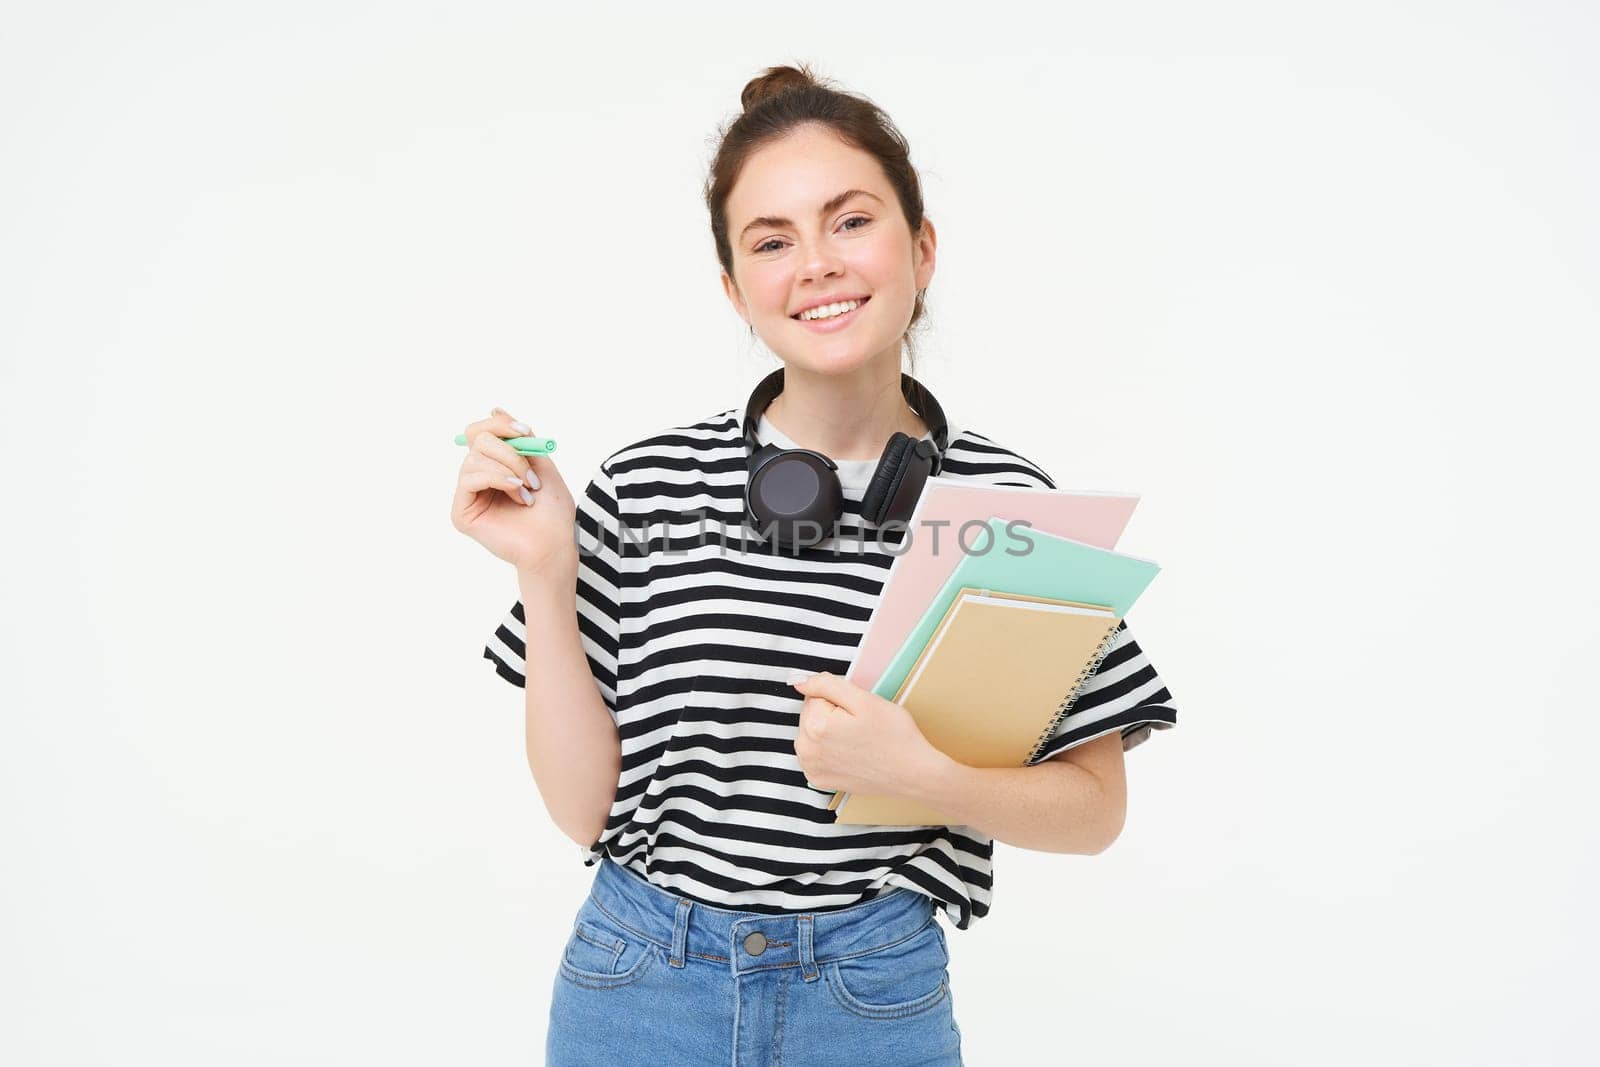 Image of young woman, tutor with books and notebooks, wearing headphones over her neck, isolated on white background. Student lifestyle concept by Benzoix